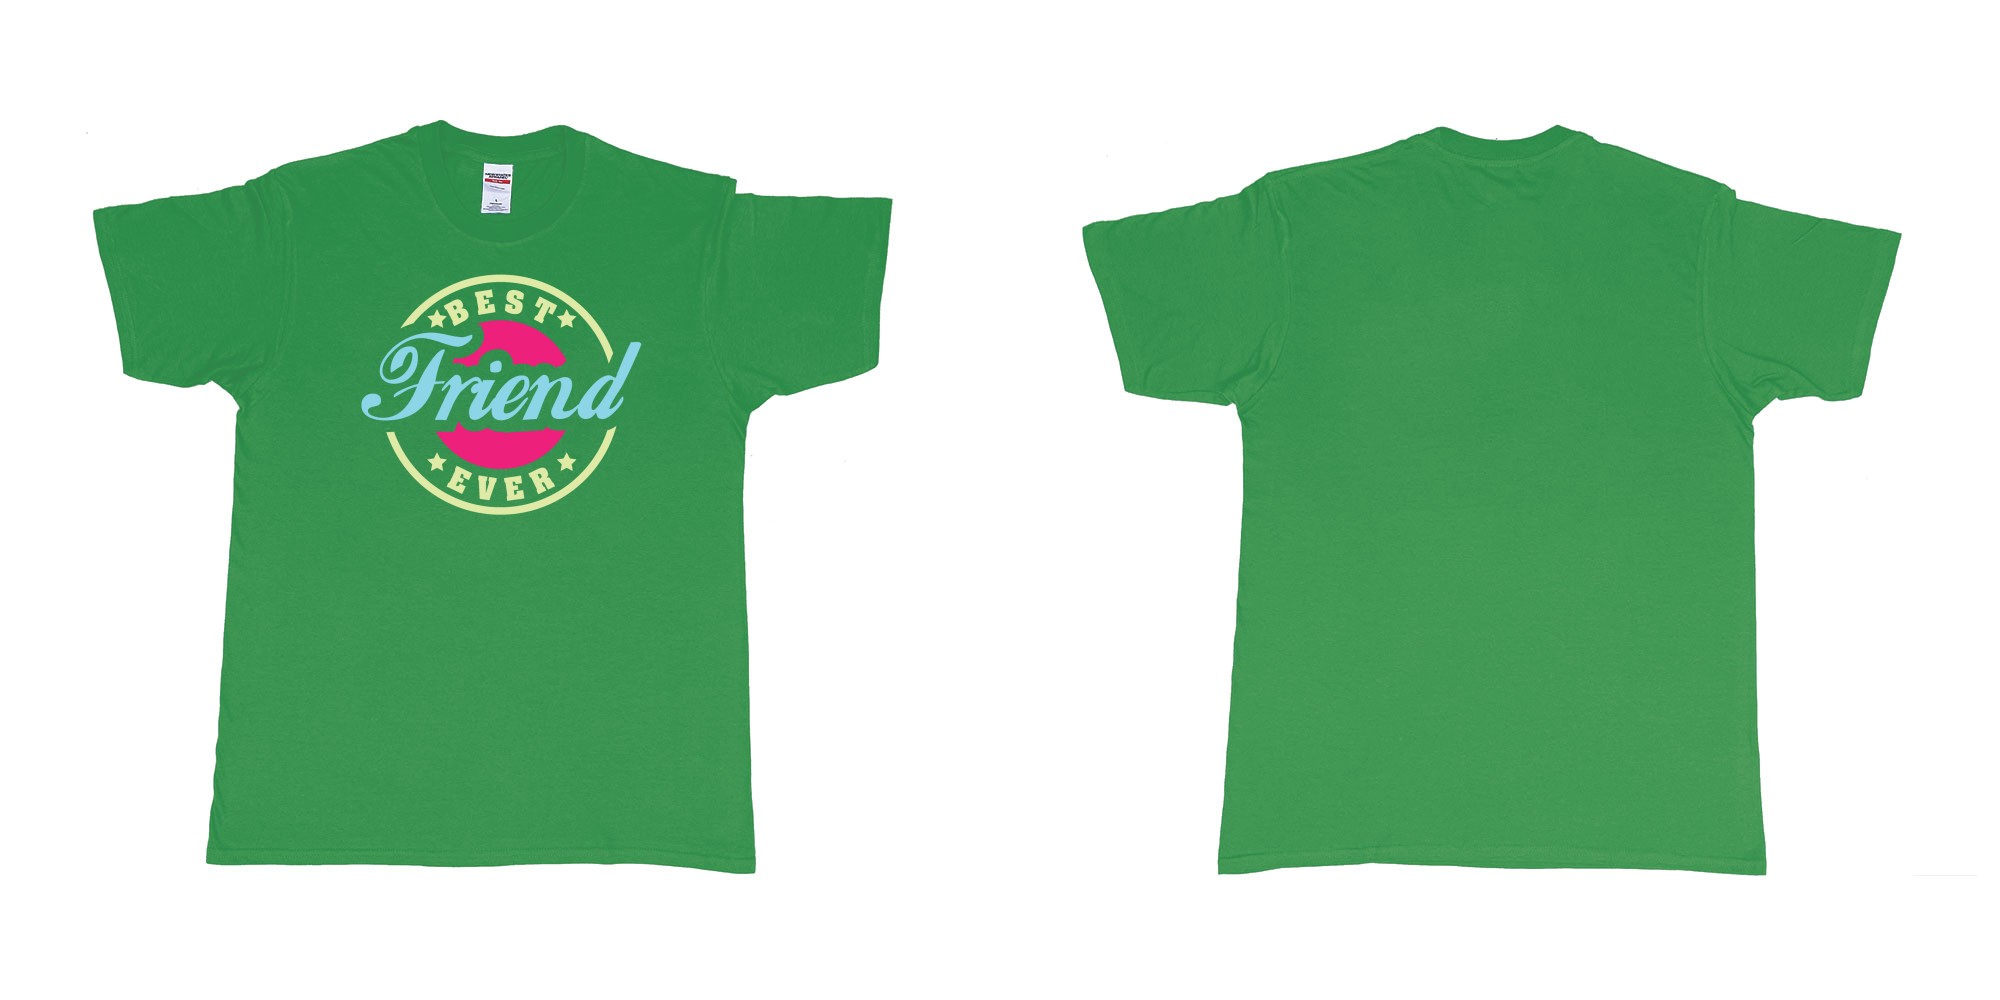 Custom tshirt design best friend ever in fabric color irish-green choice your own text made in Bali by The Pirate Way